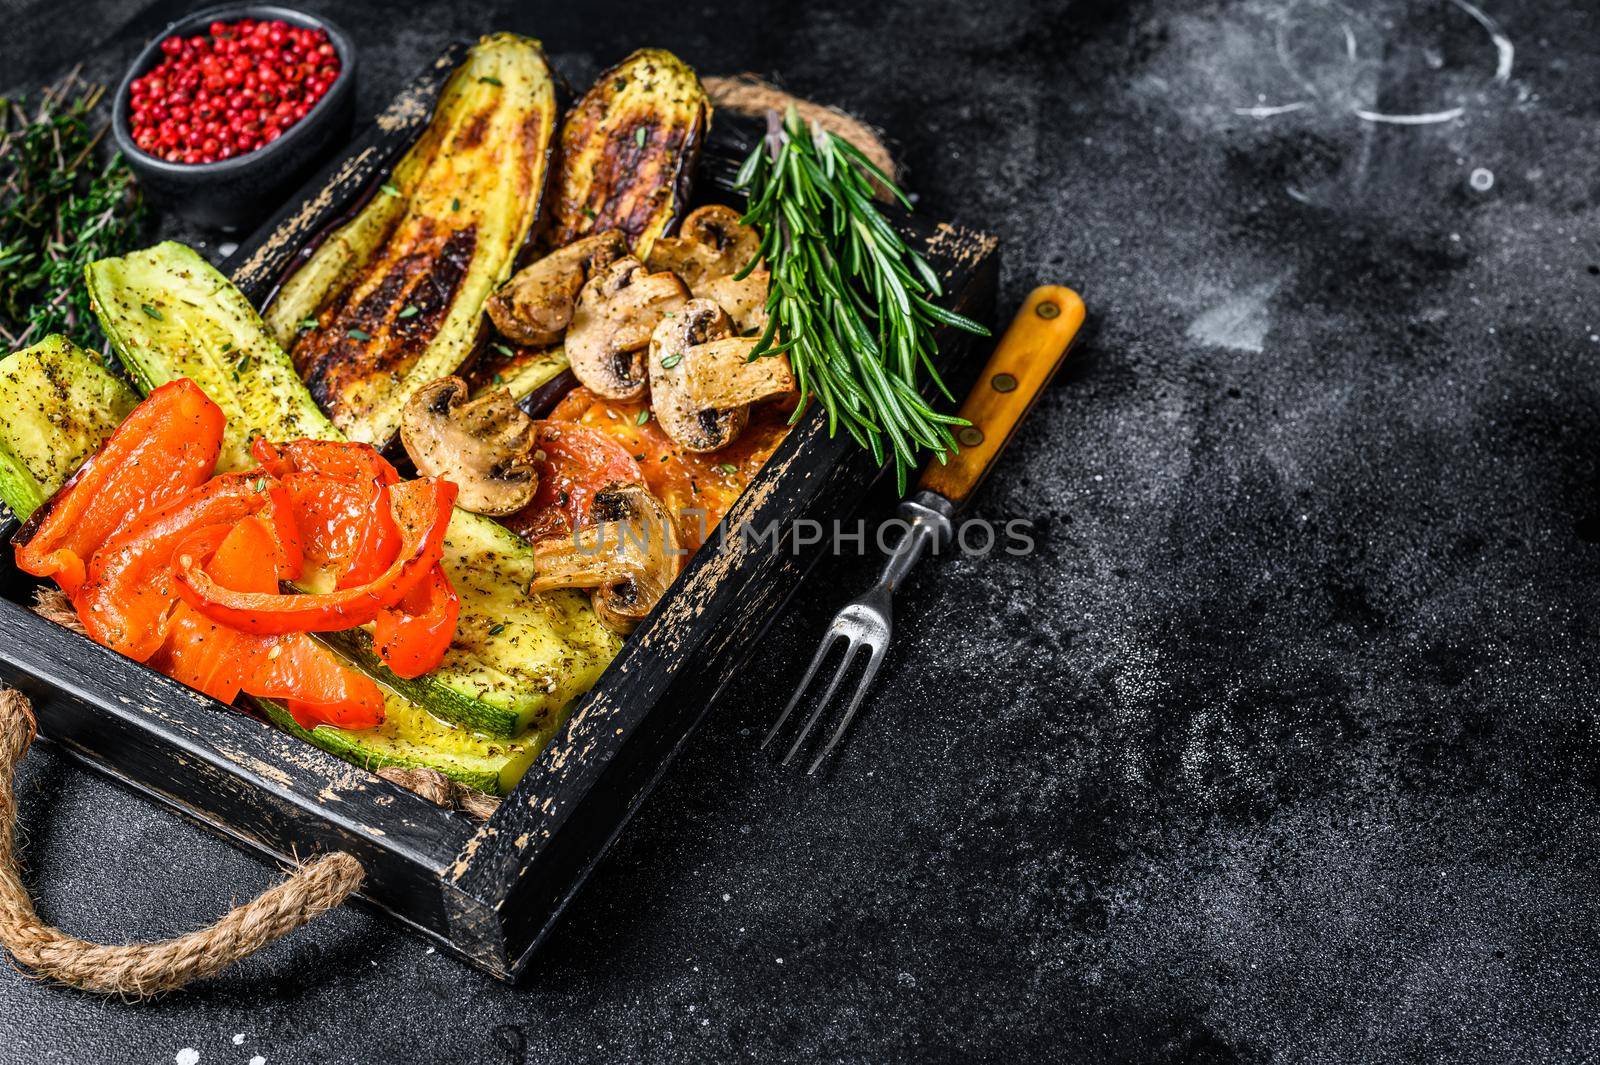 Baked vegetables bell pepper, zucchini, eggplant and tomato in a wooden tray. Black wooden background. Top view. Copy space by Composter